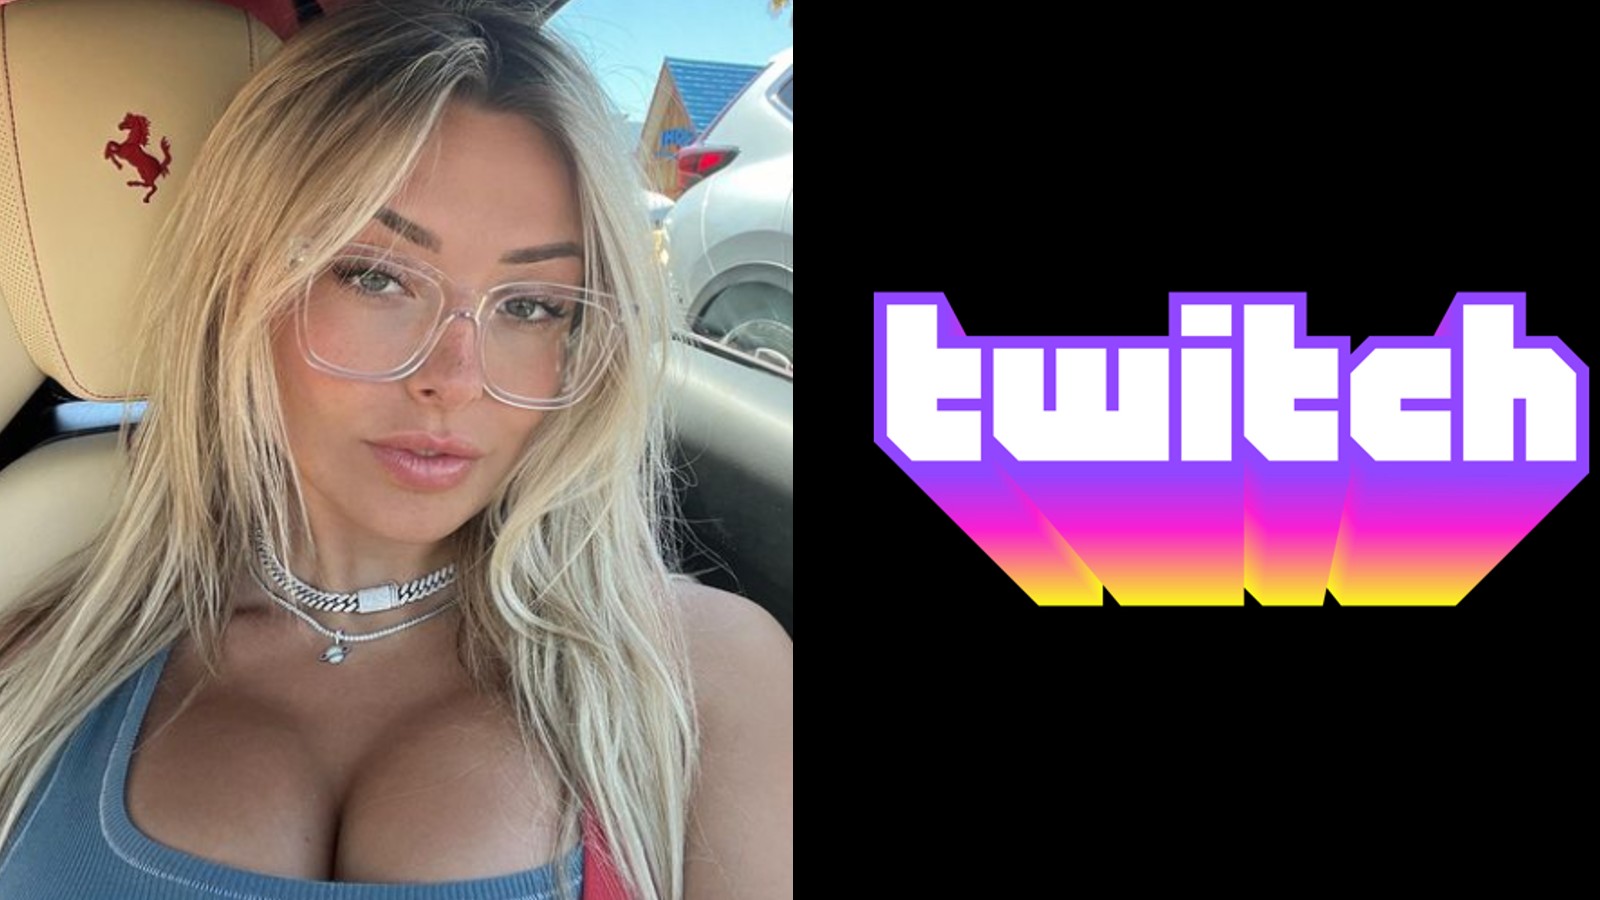 Corinna Kopf criticizes Twitch gambling ban: “We wont be able to do anything”